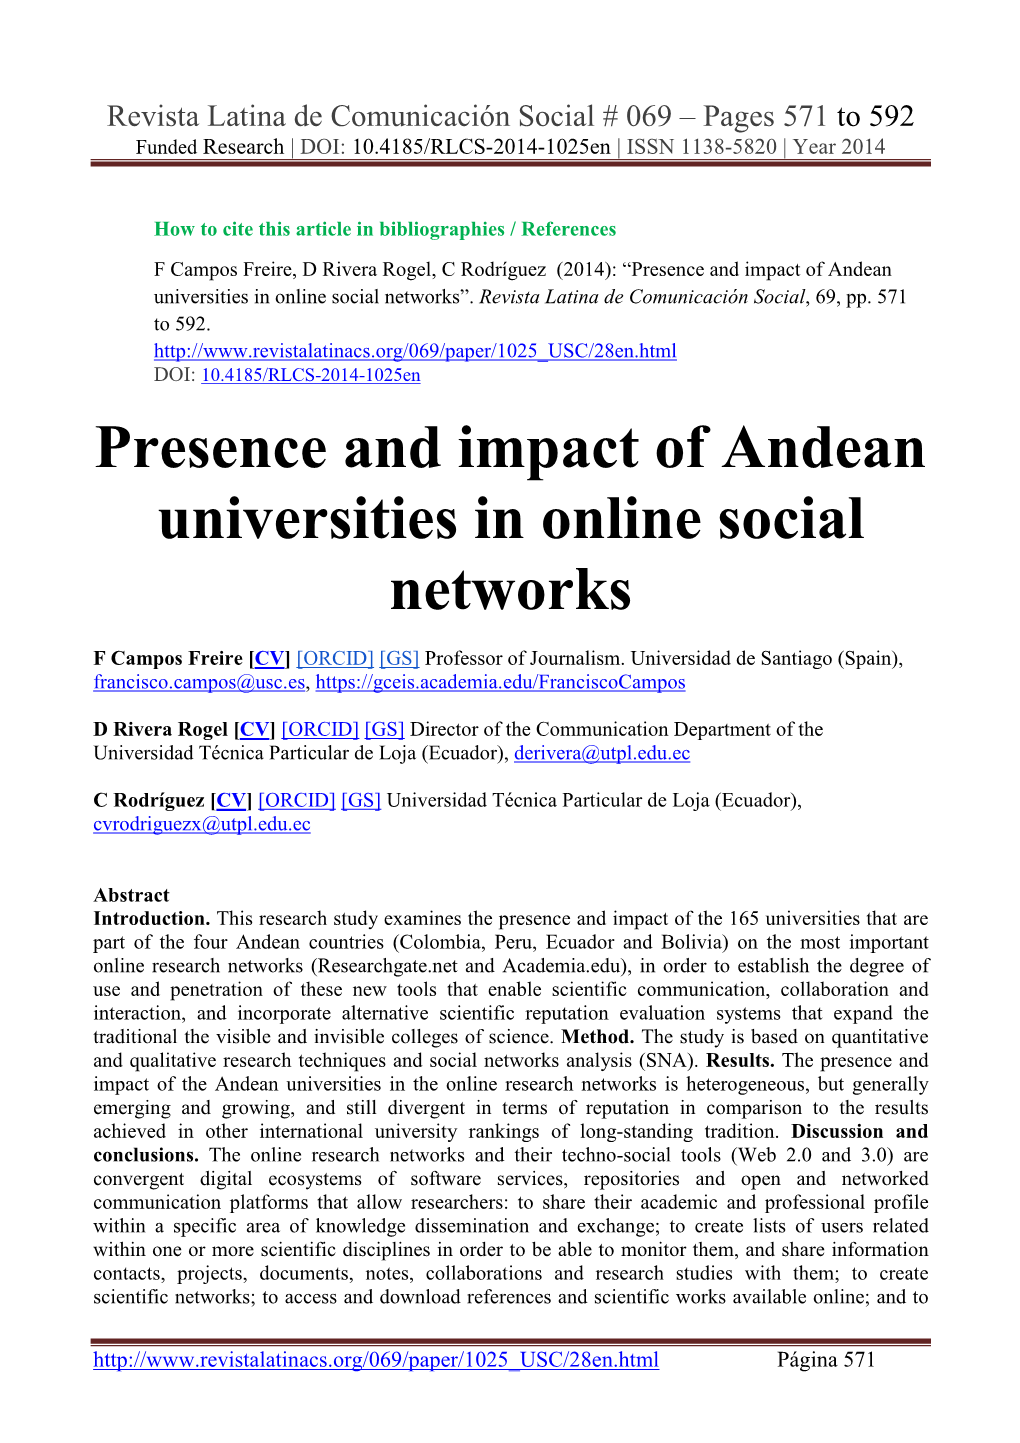 Presence and Impact of Andean Universities in Online Social Networks”